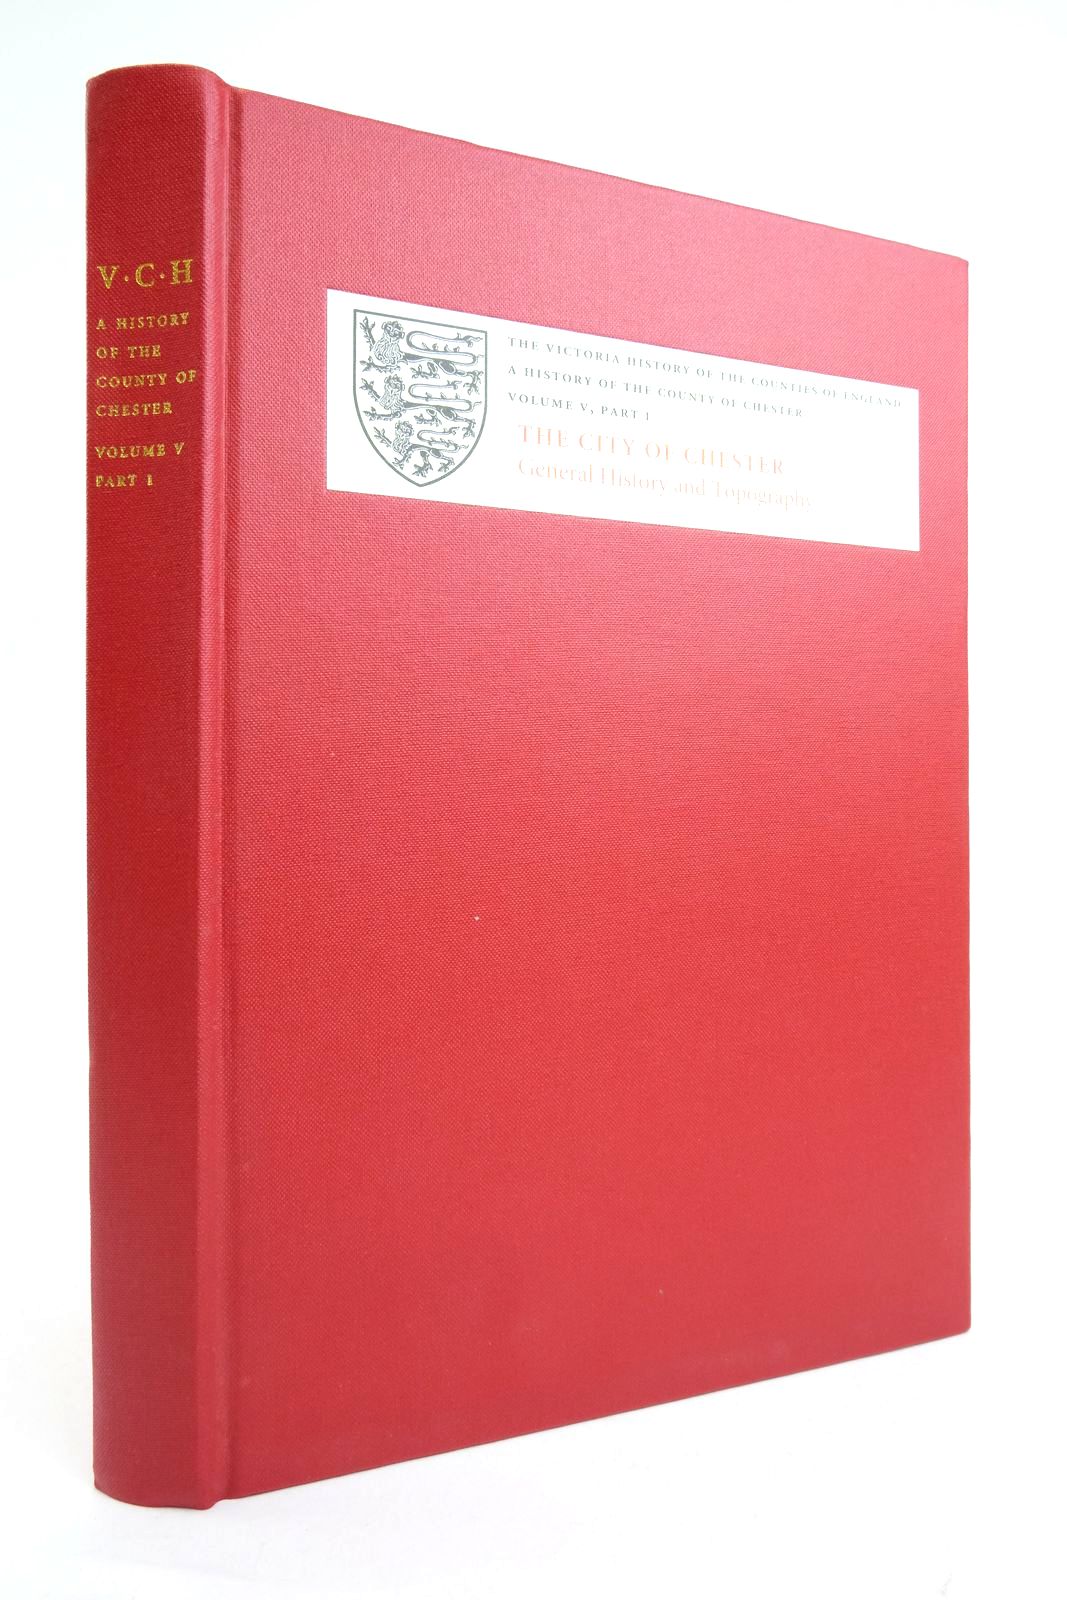 Photo of A HISTORY OF THE COUNTY OF CHESTER: VOLUME V, PART 1 THE CITY OF CHESTER: GENERAL HISTORY AND TOPOGRAPHY written by Lewis, C.P. Thacker, A.T. published by Institute Of Historical Research (STOCK CODE: 2136482)  for sale by Stella & Rose's Books